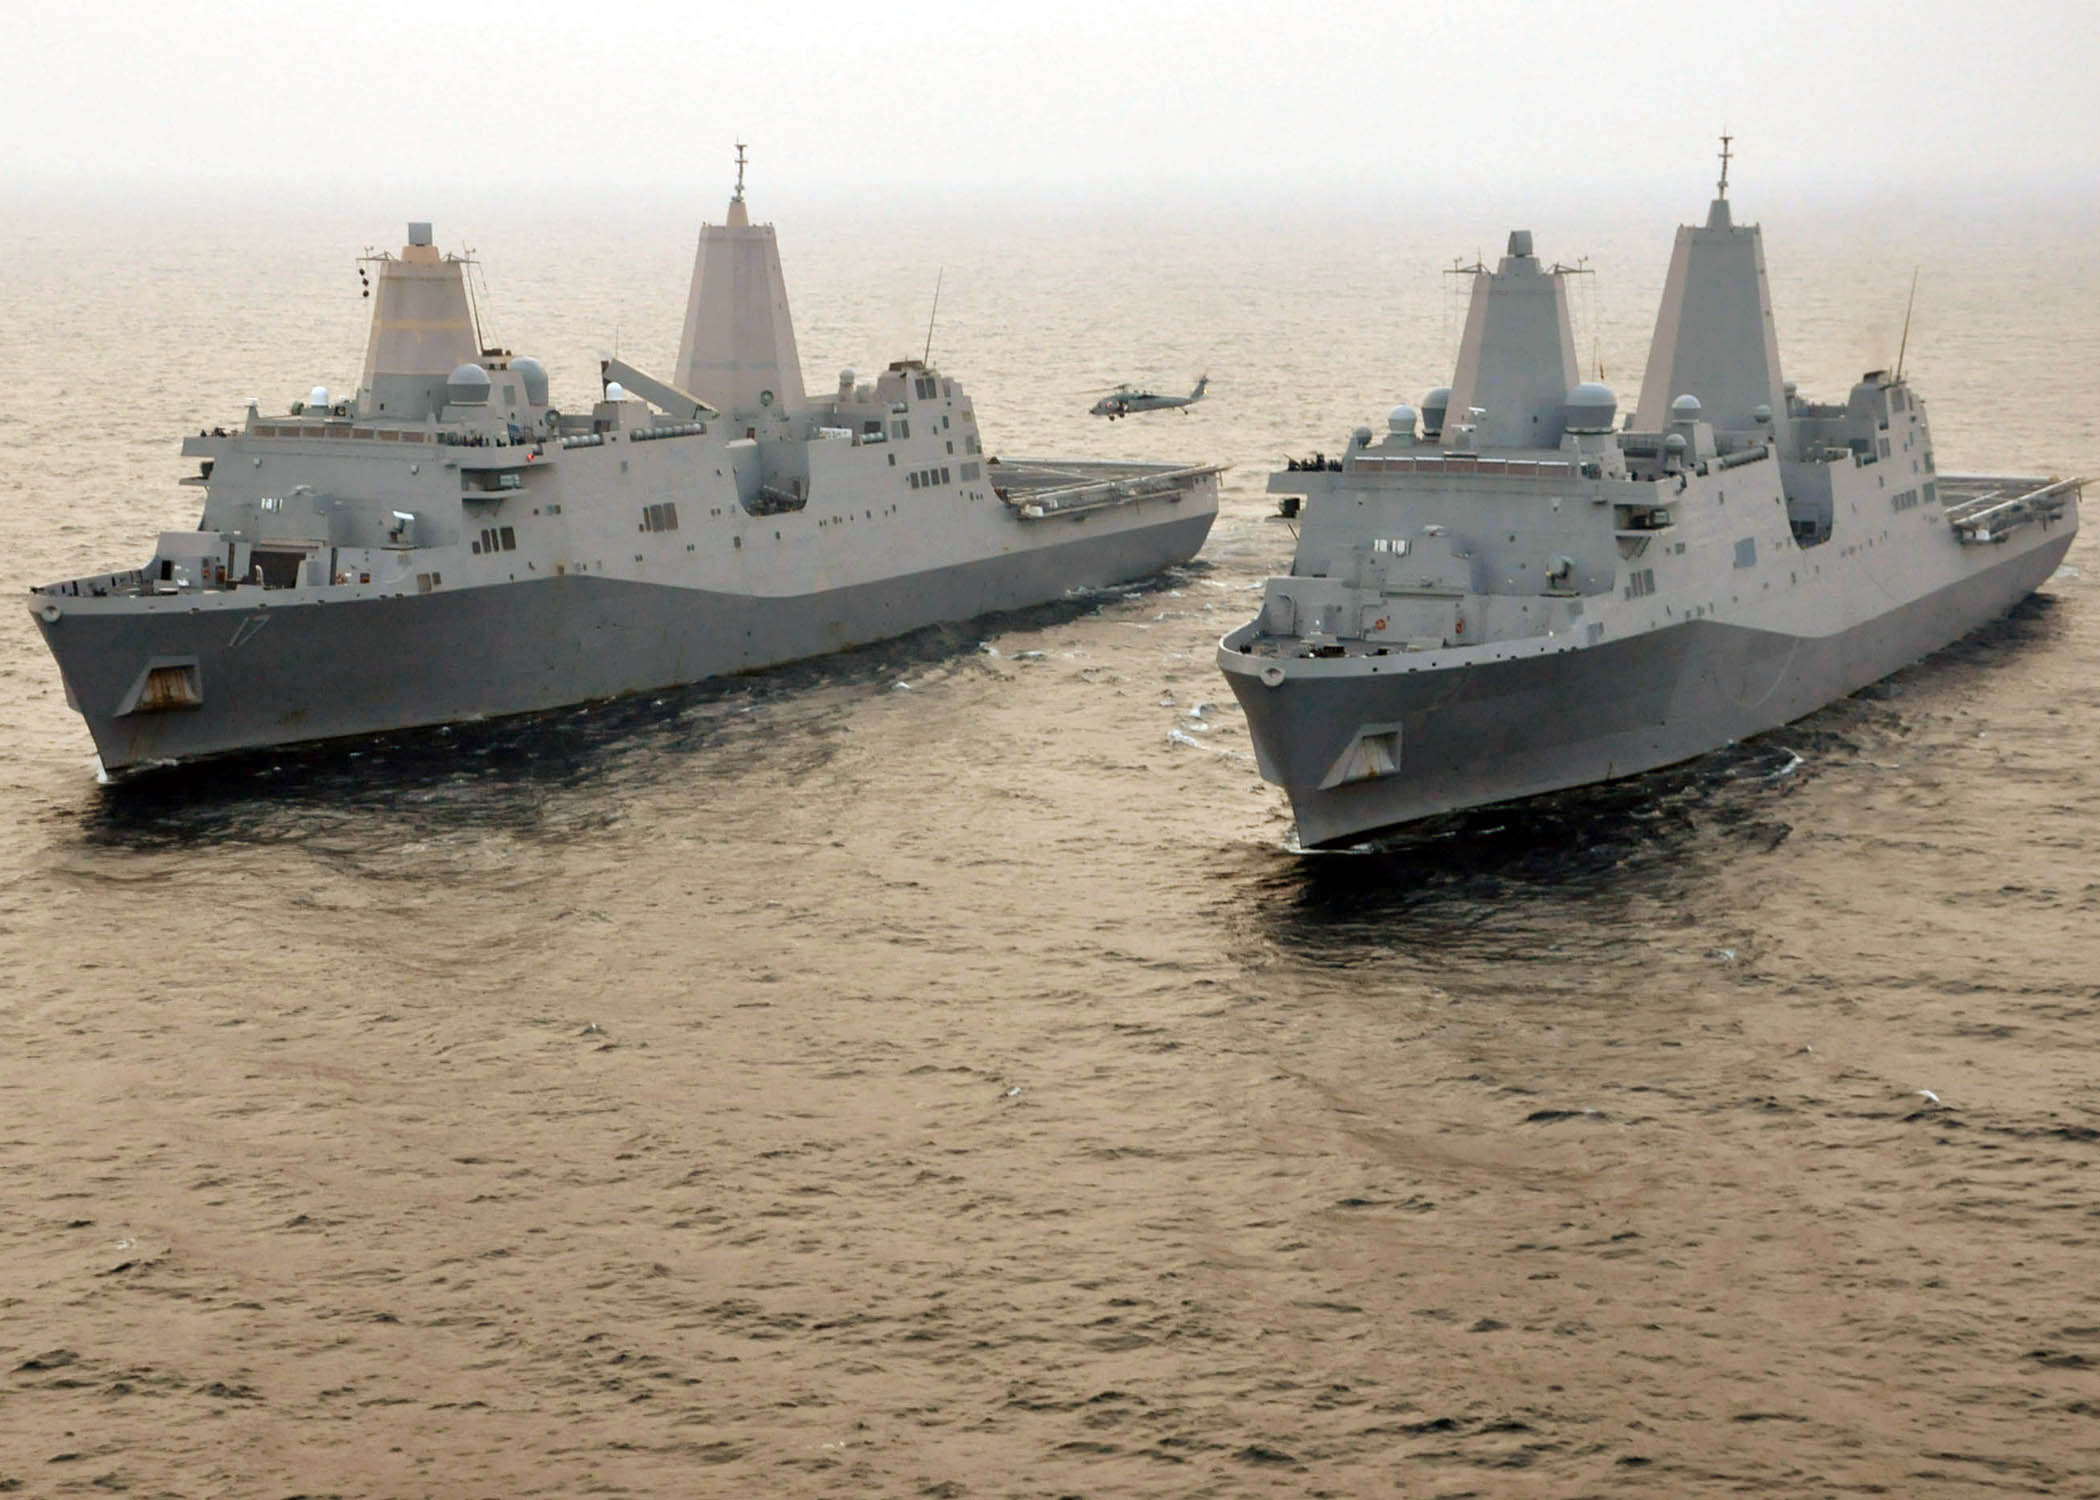 US_Navy_110609-N-VL218-336_The_amphibious_transport_dock_ships_USS_San_Antonio_%28LPD_17%29_and_USS_New_York_%28LPD_21%29_are_underway_together_in_the_Atla.jpg